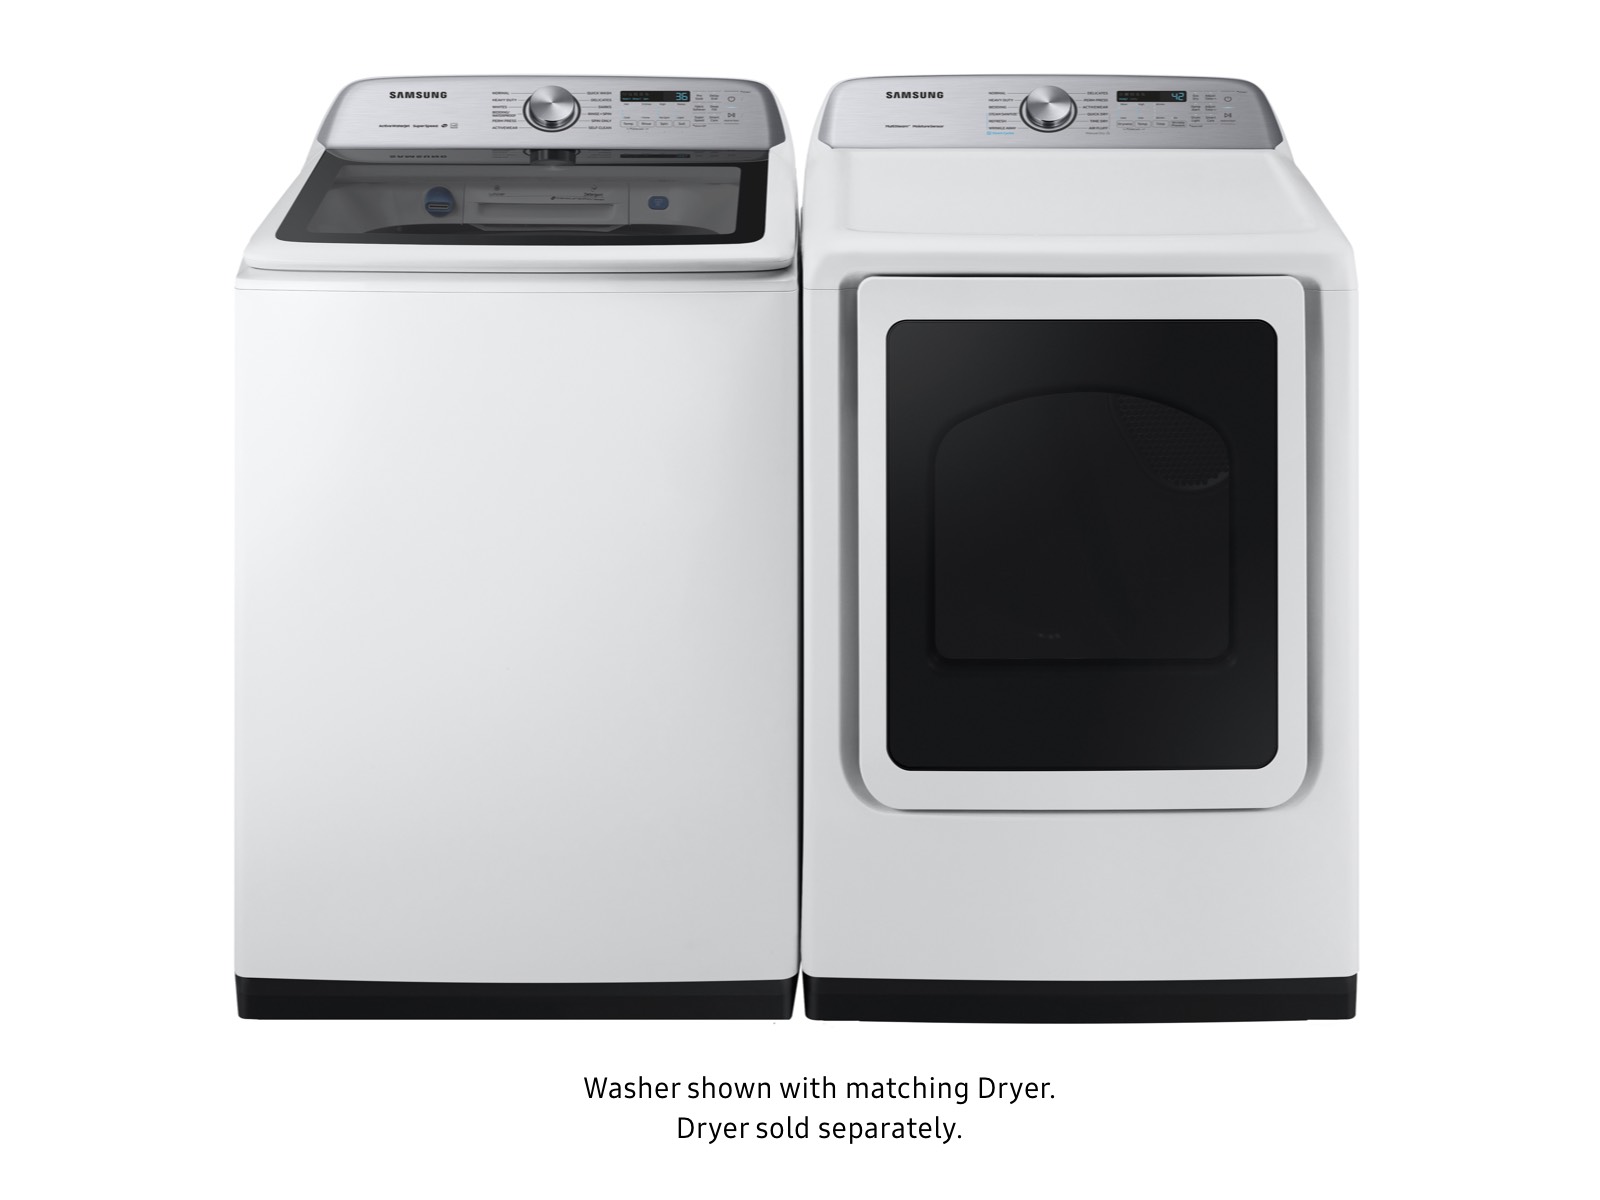 https://image-us.samsung.com/SamsungUS/home/home-appliances/washers/top-load/pd/wa50r5400avus/updated_gallery_images_092319/WA50R5400AW_US_DVE50R5400W_A3_pair_015_FrontPair_White_NOFEET.jpg?$product-details-jpg$